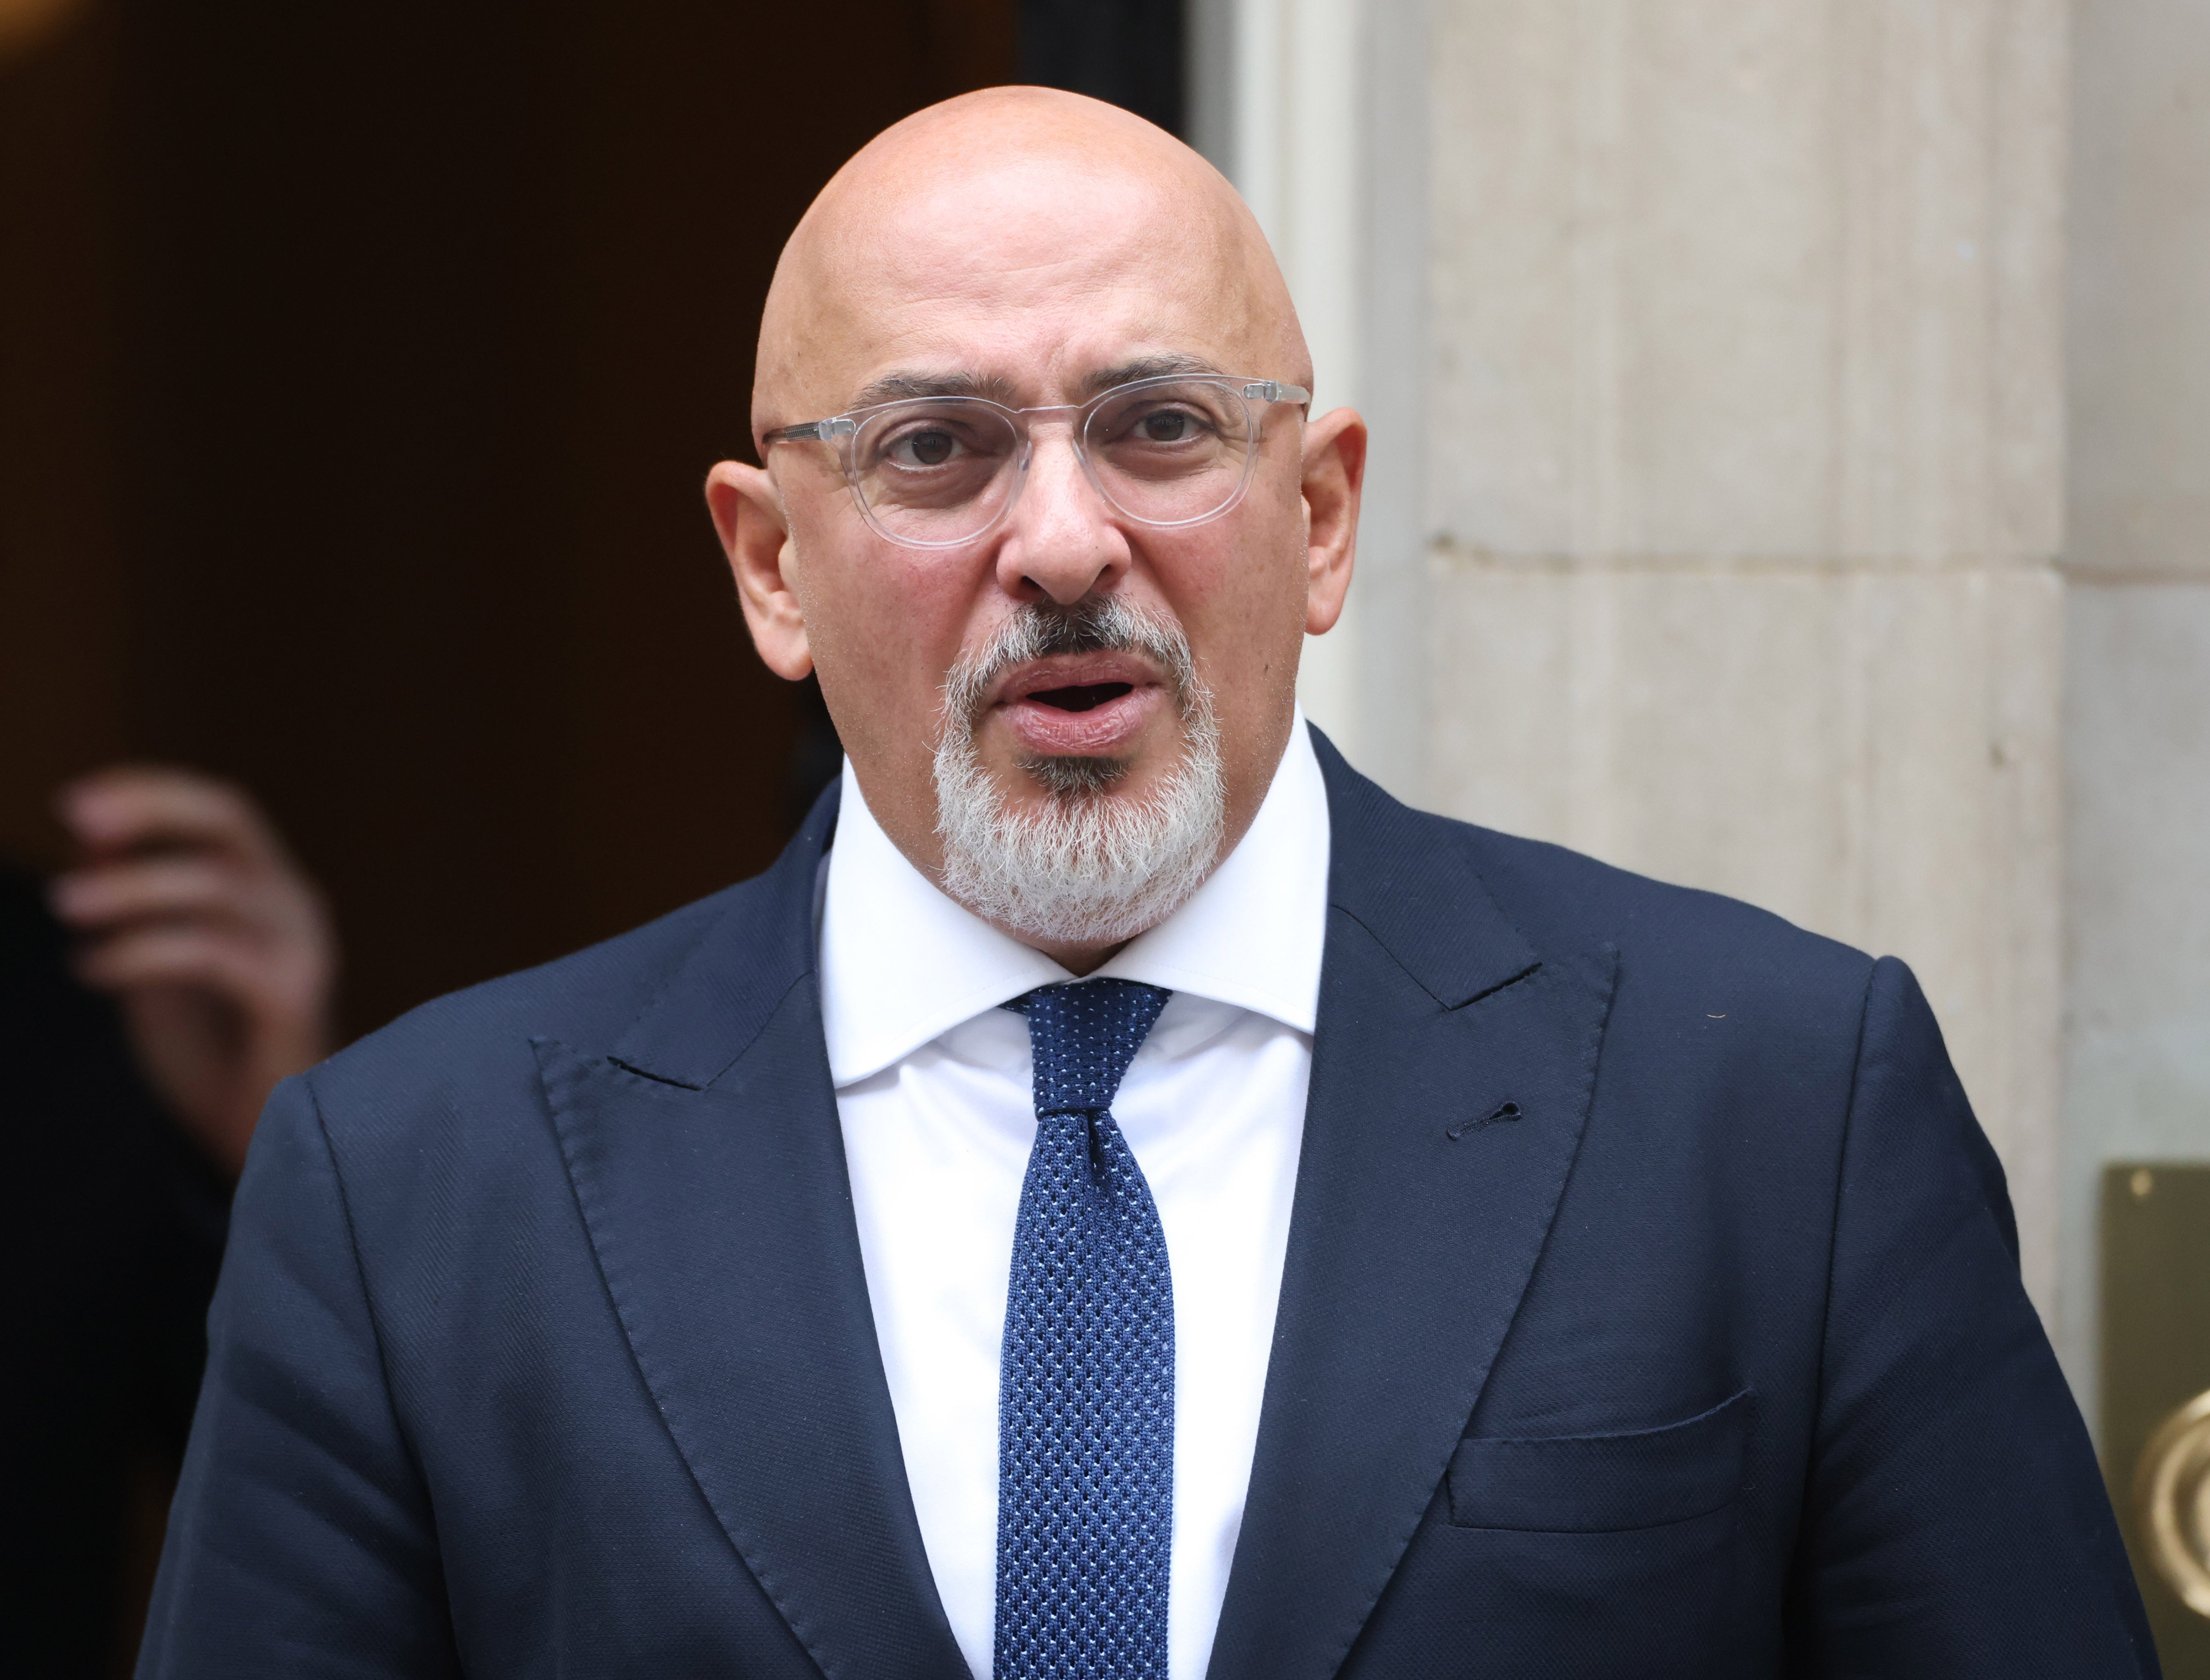 Education Secretary Nadhim Zahawi said schools must not address political issues in a ‘partisan’ way